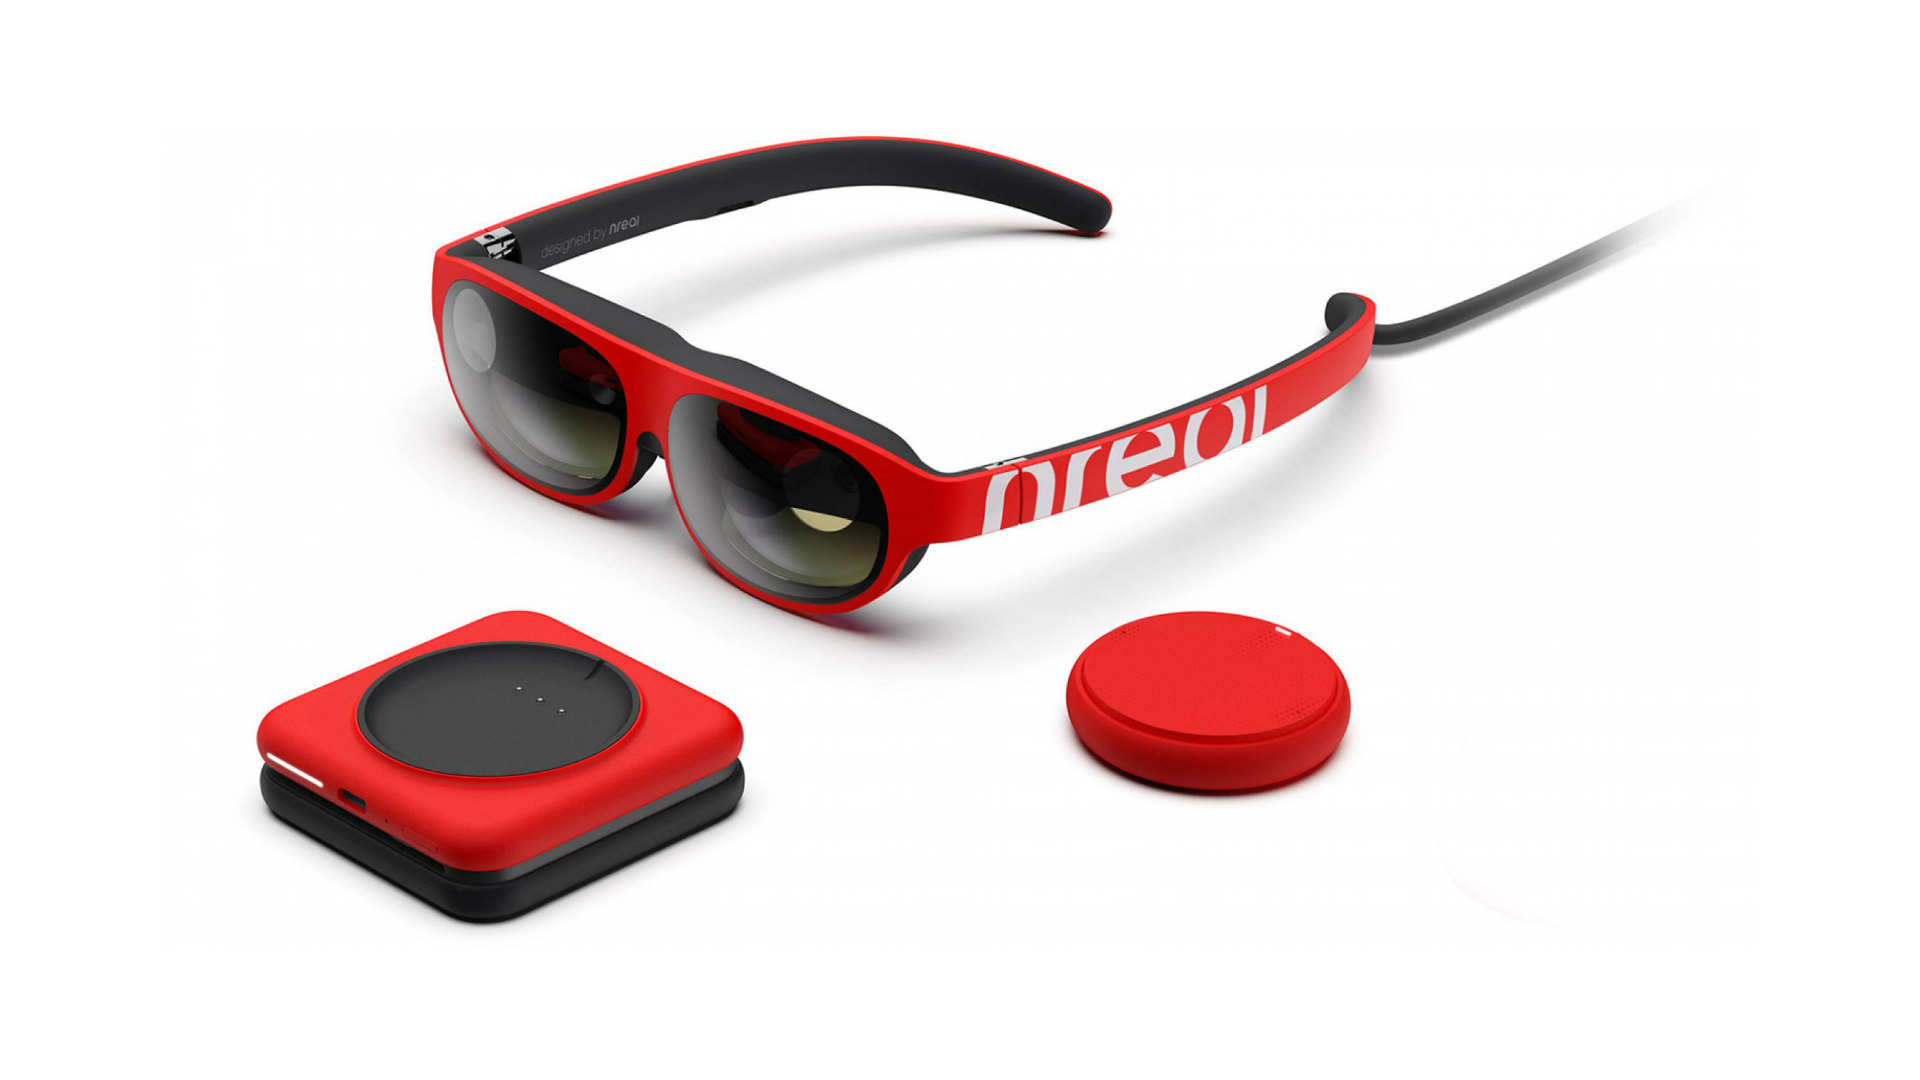 Nreal Temporarily Halts Production of 'Light' AR Headset due to Coronavirus  – Road to VR